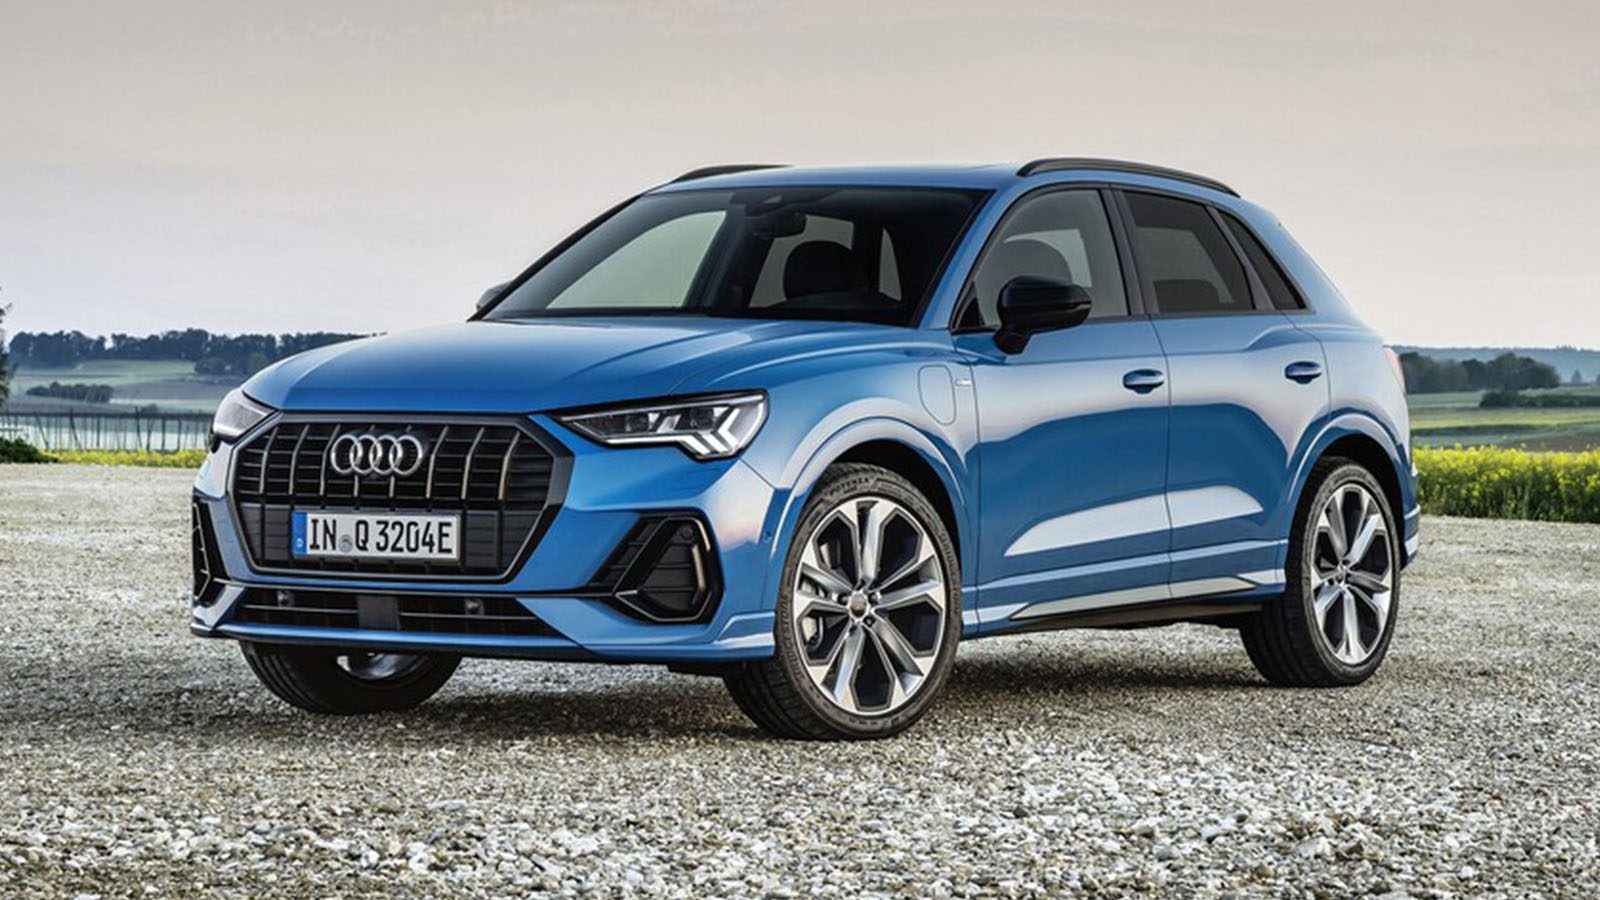  2022 blue Audi Q3 SUV with country background